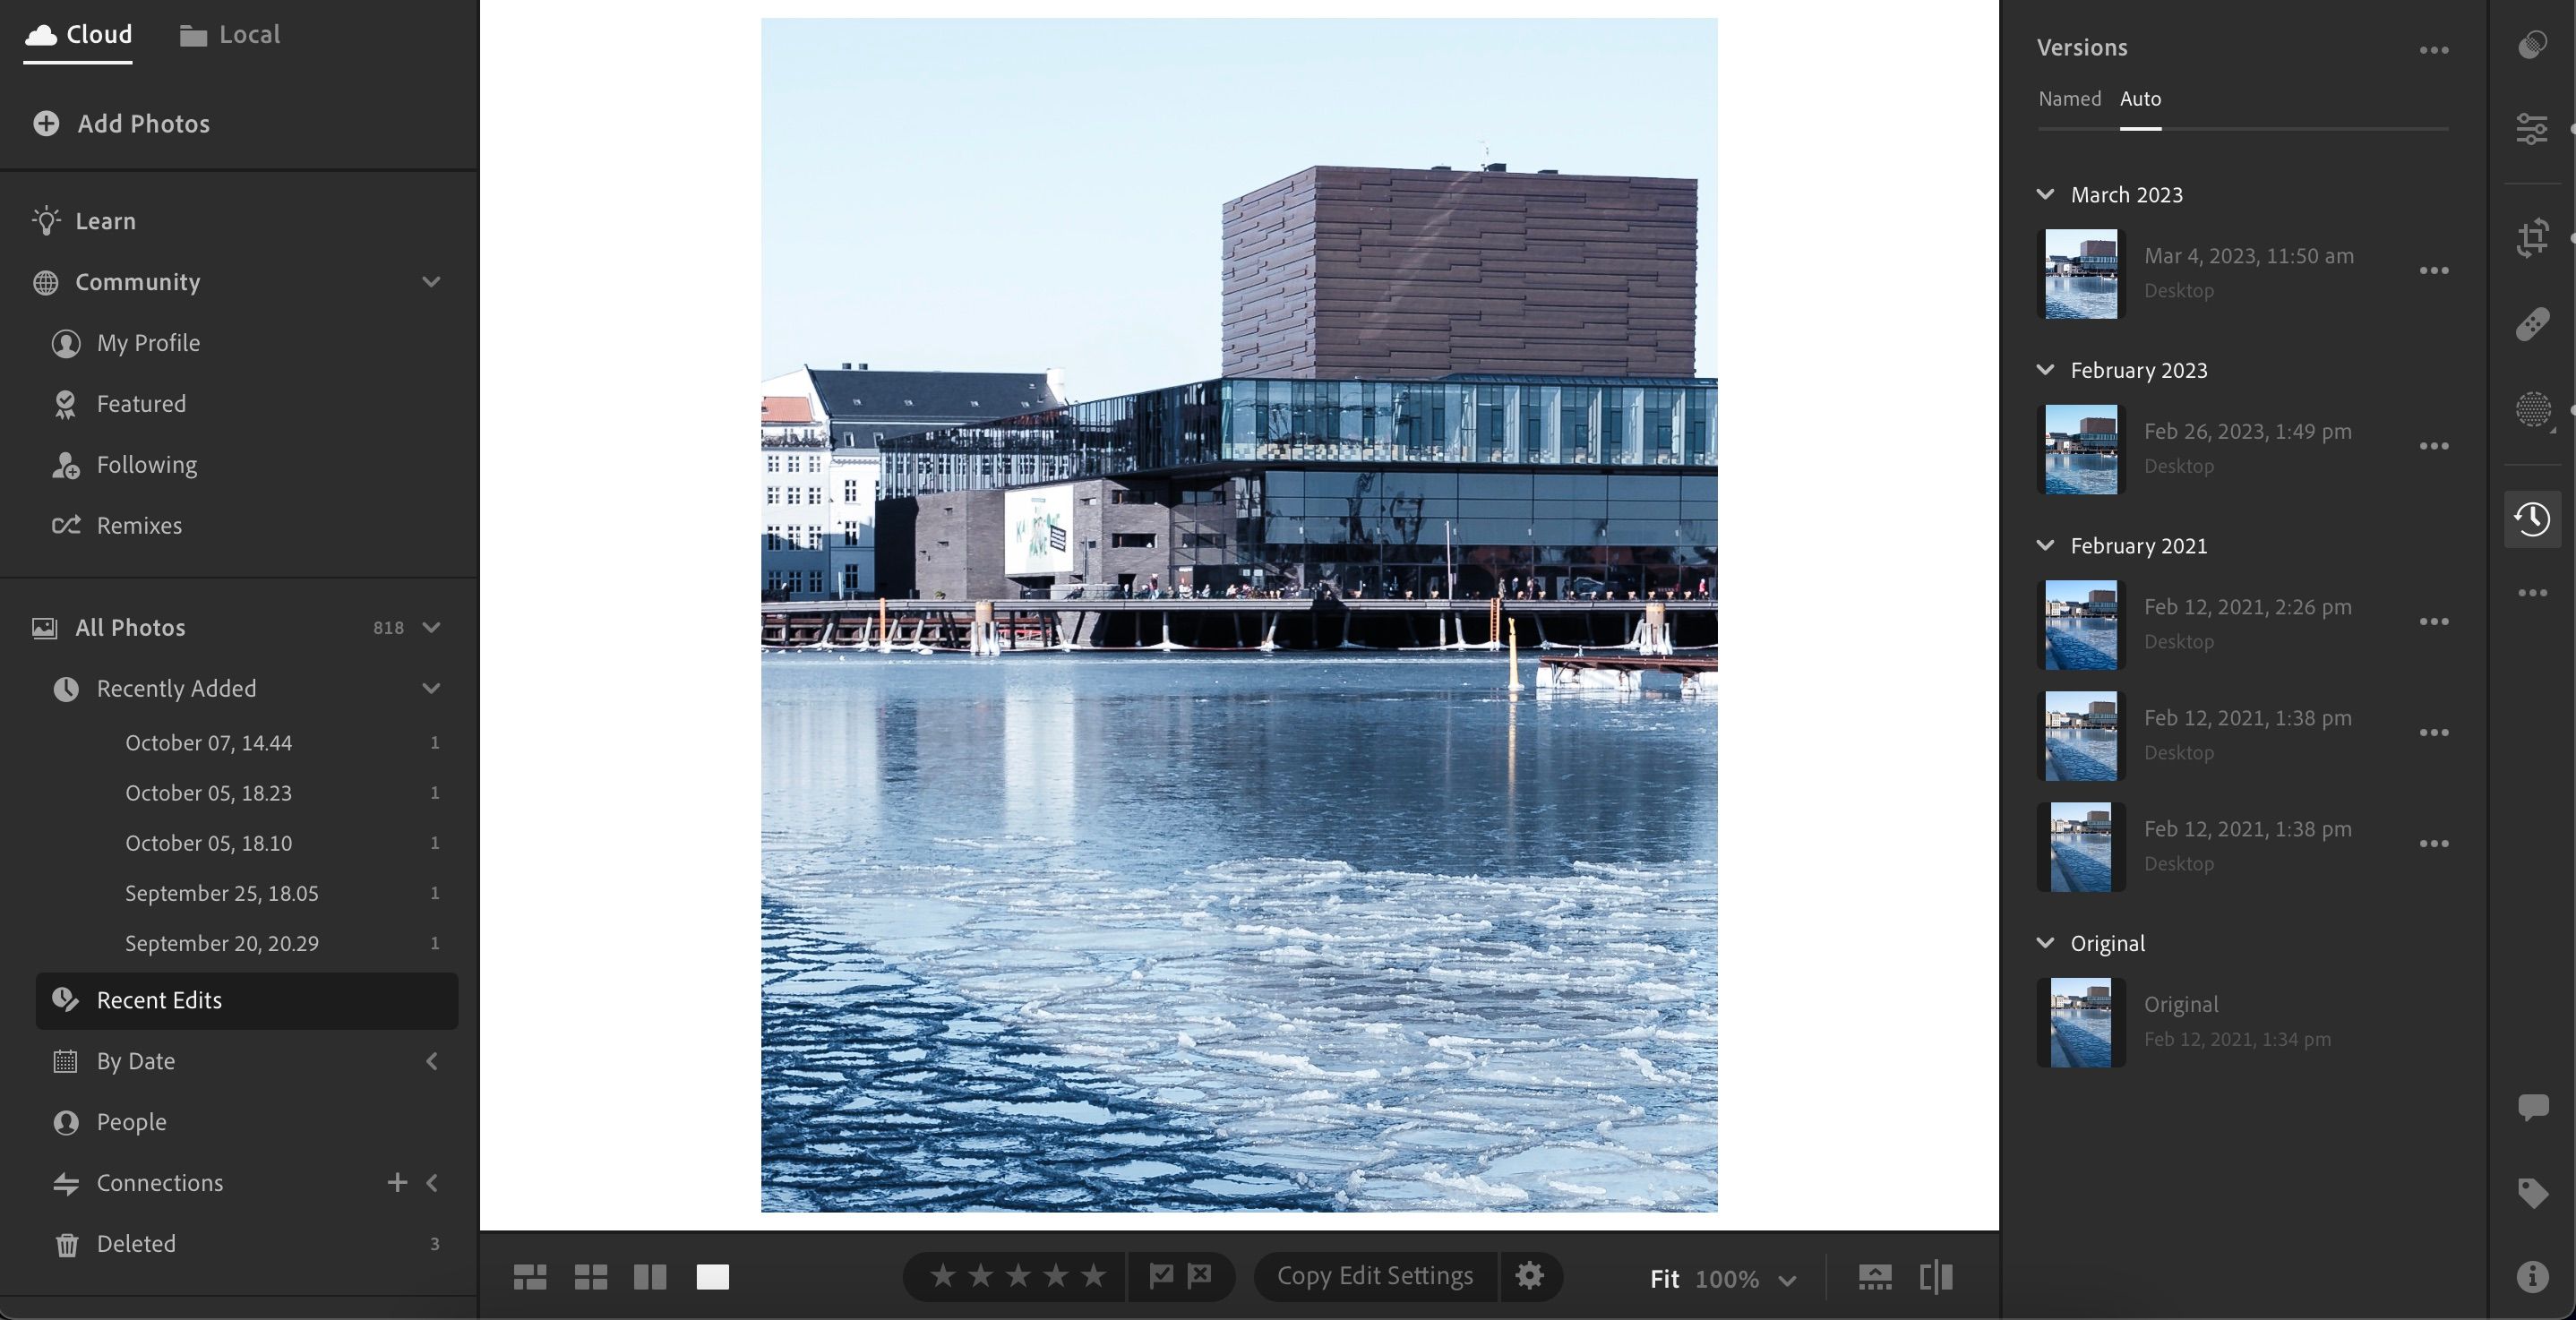 The Auto Versions Section in Adobe Lightroom